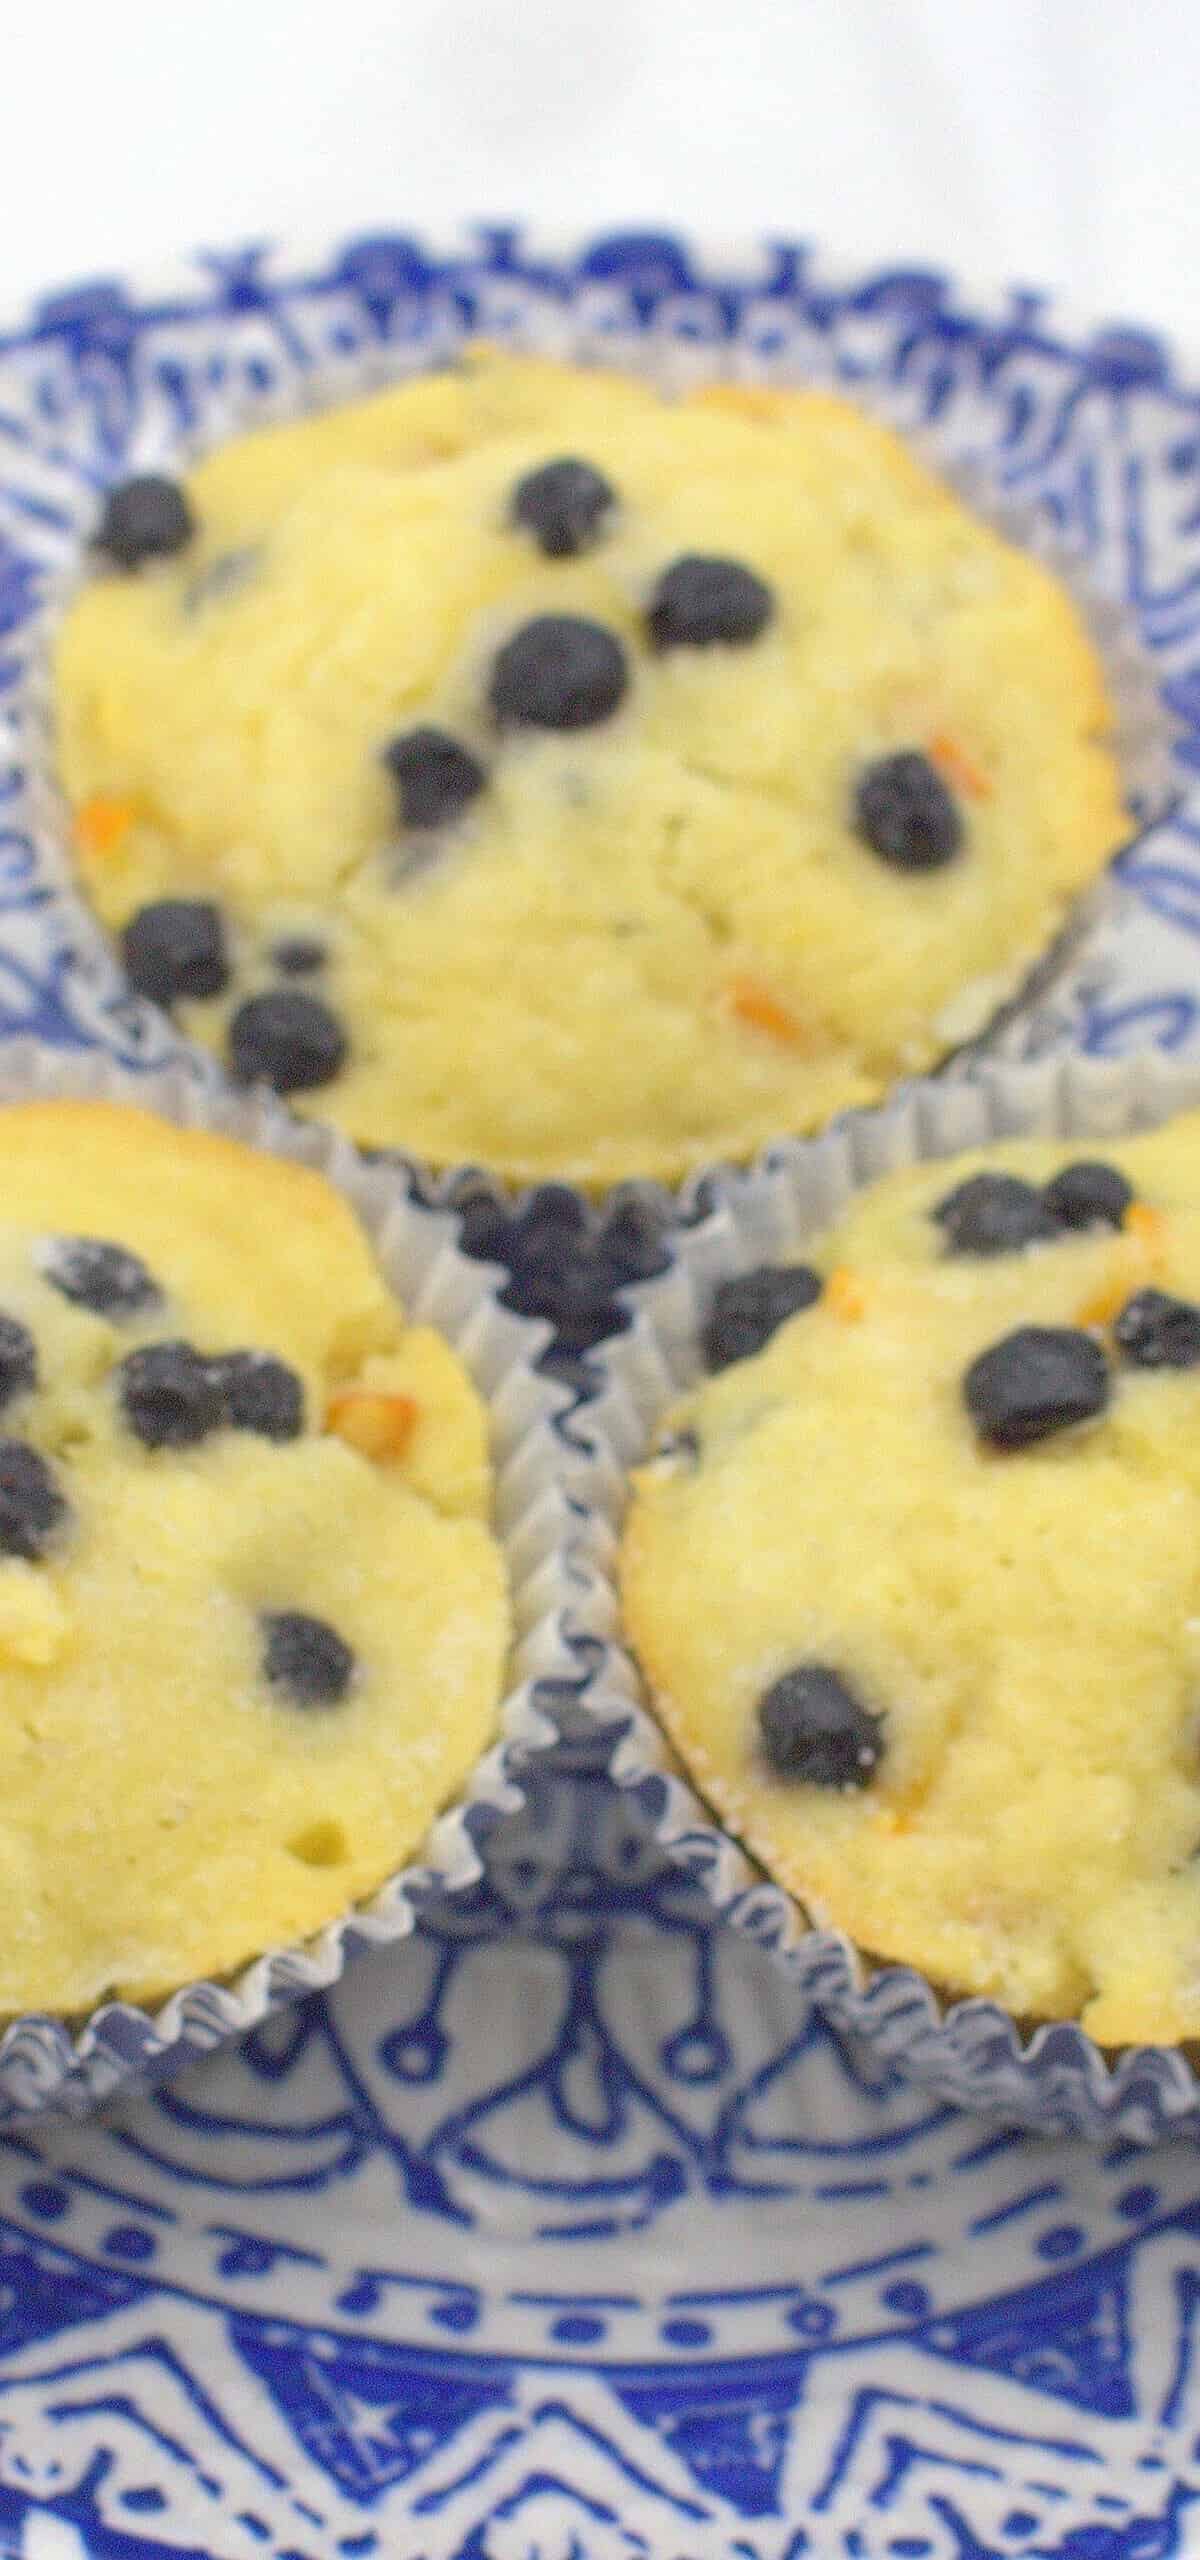  Baking these muffins will fill your house with the amazing aroma of zesty kumquat.